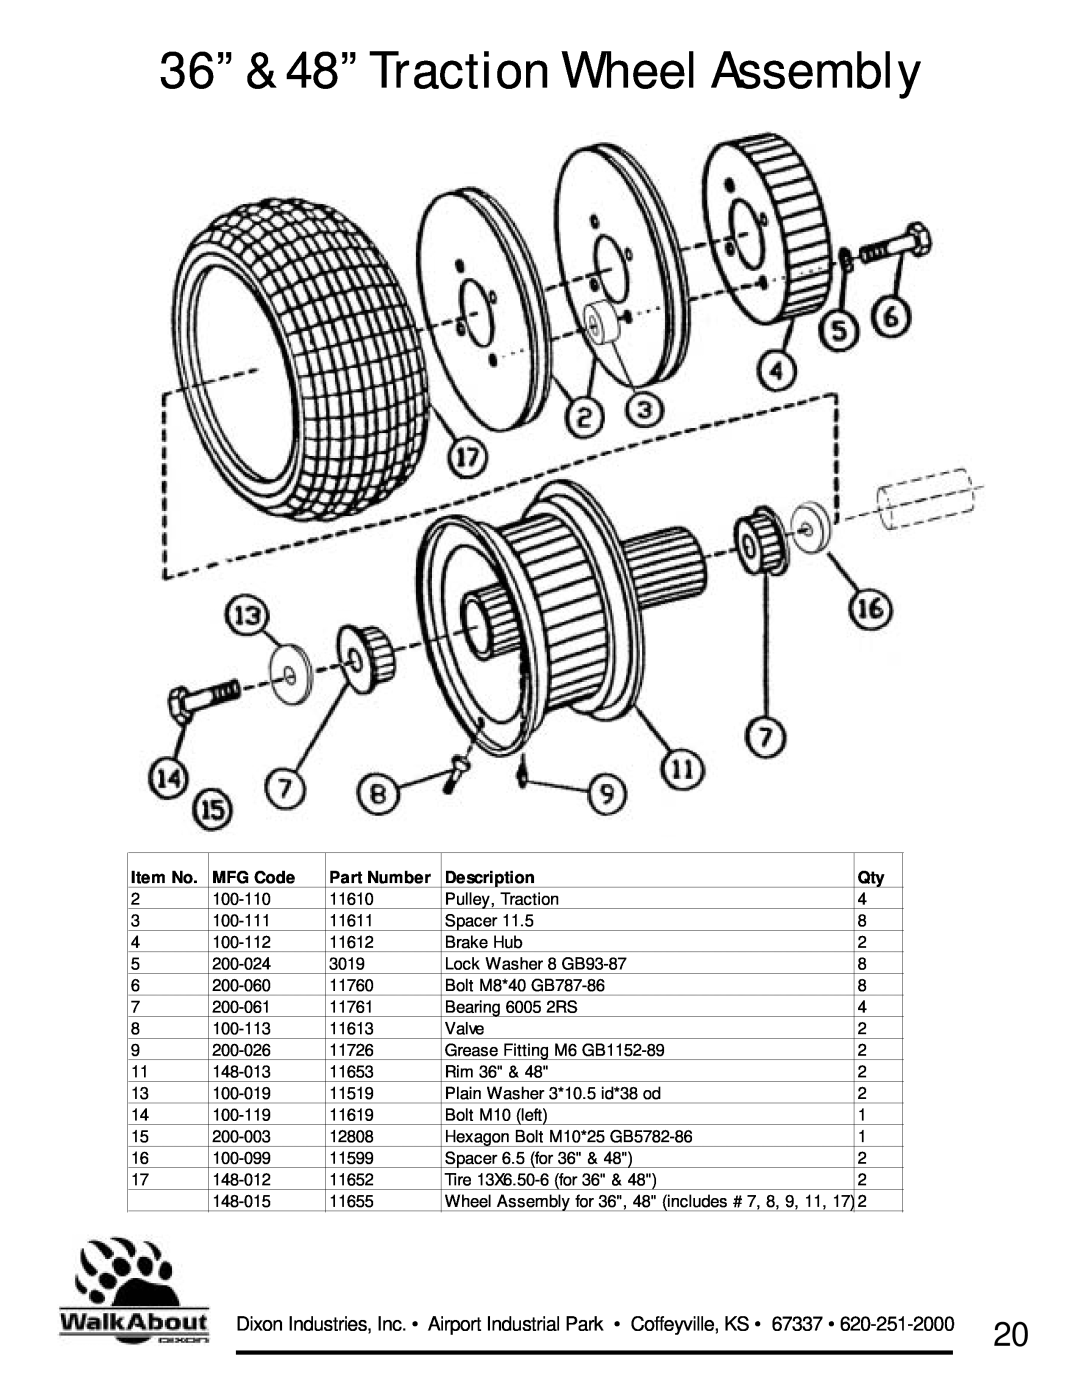 Dixon 36 & 48 owner manual 36” & 48” Traction Wheel Assembly, Item No, MFG Code, Part Number, Description 